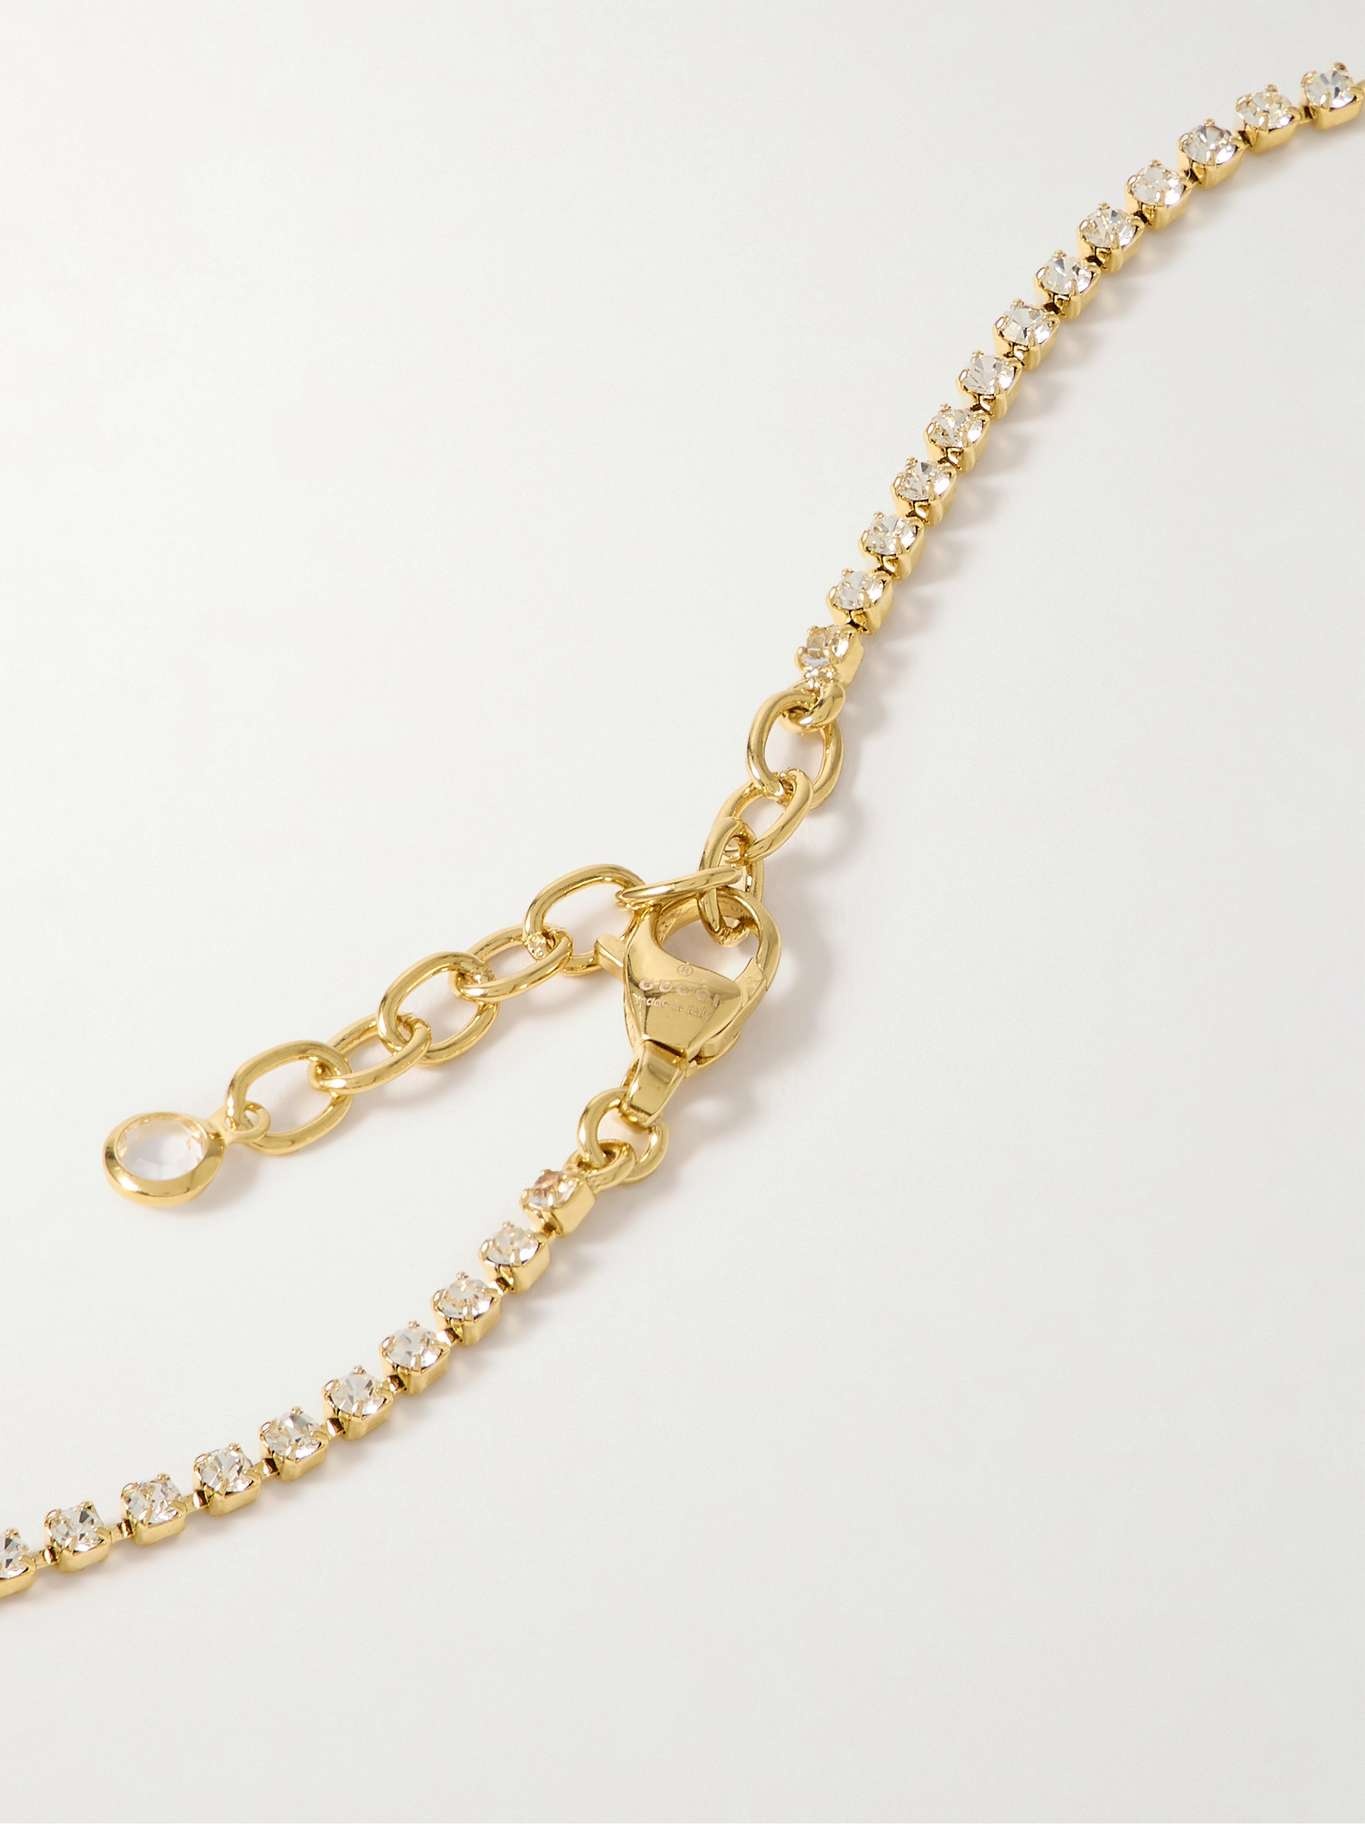 Blondie gold-tone, faux-pearl and crystal necklace - 3